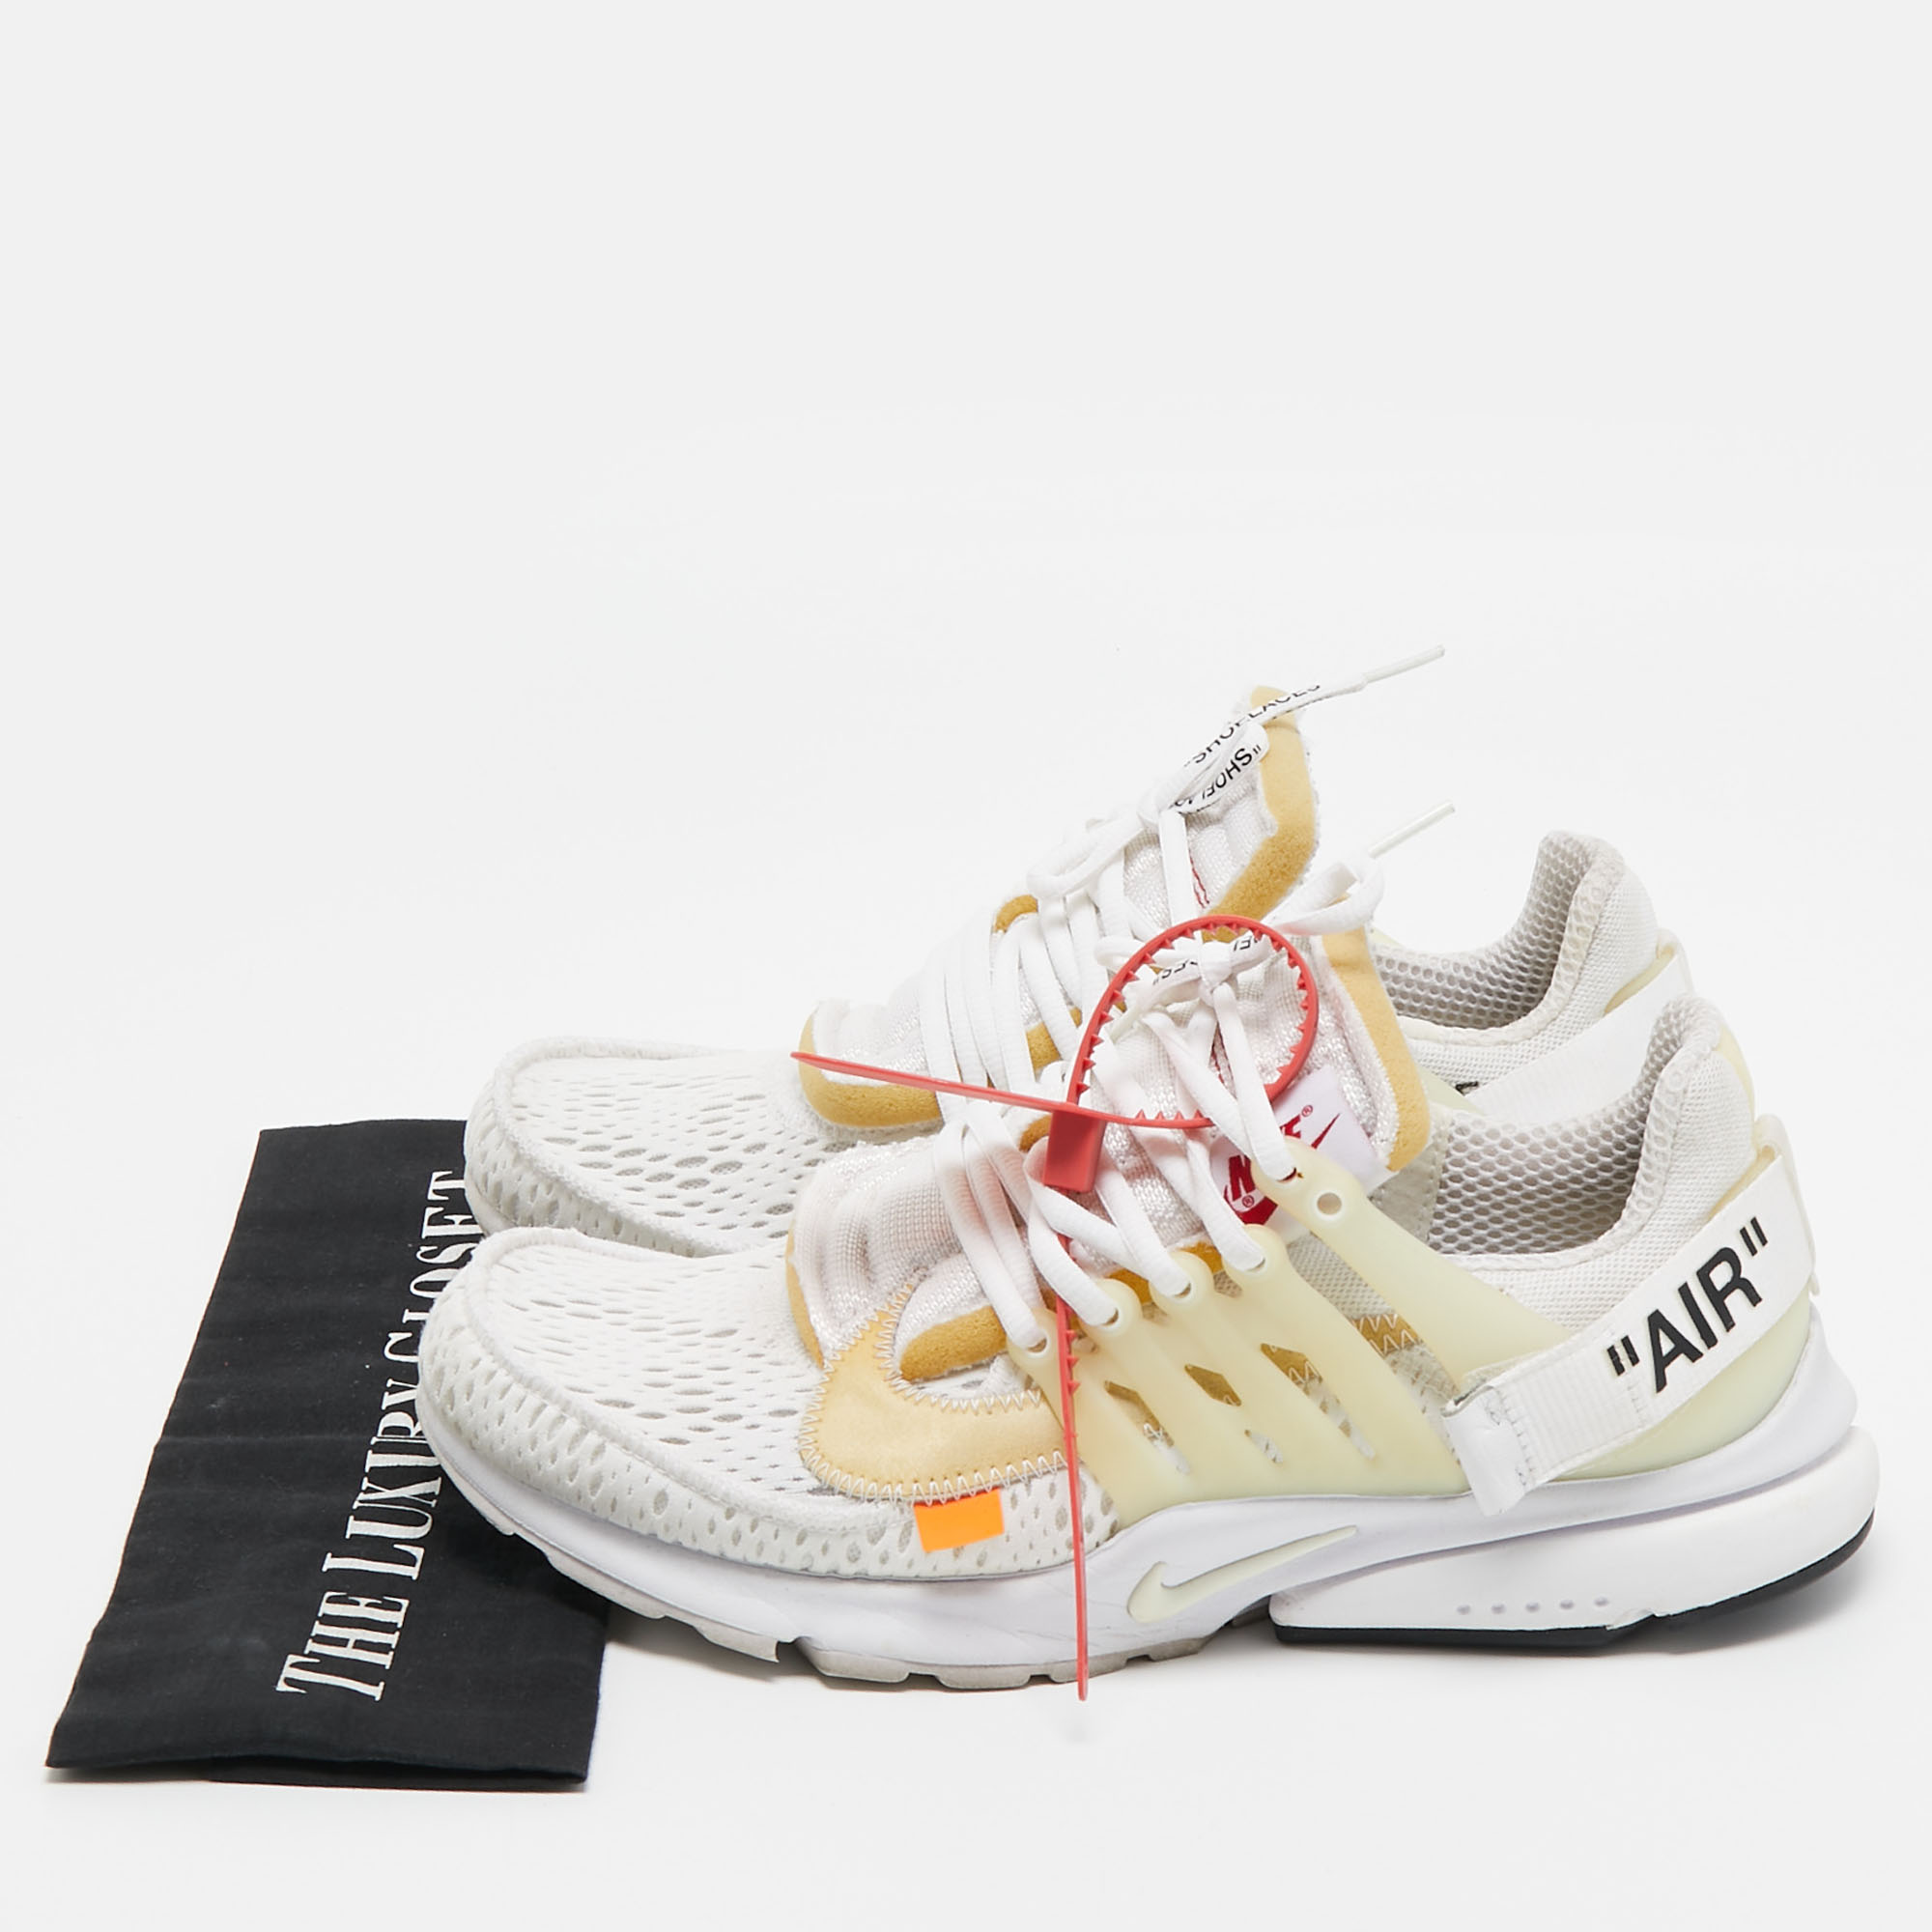 Nike X Off White  White Fabric Air Presto Low Trainers Sneakers Size 42.5